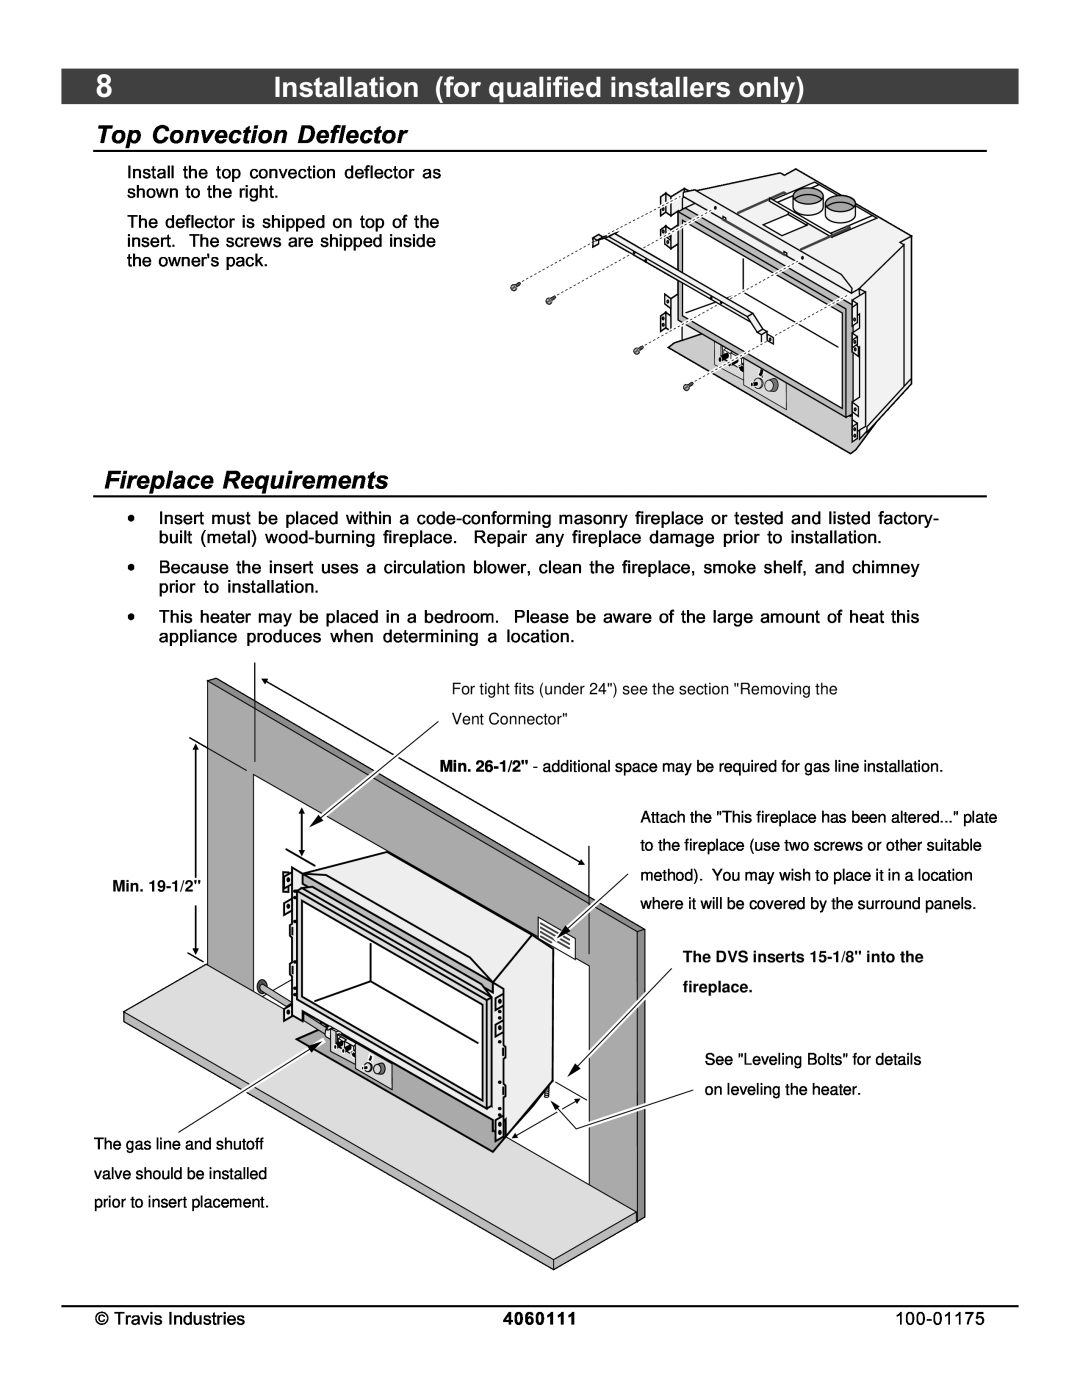 Avalon Stoves DVS Insert EF II owner manual Top Convection Deflector, Fireplace Requirements, 4060111 